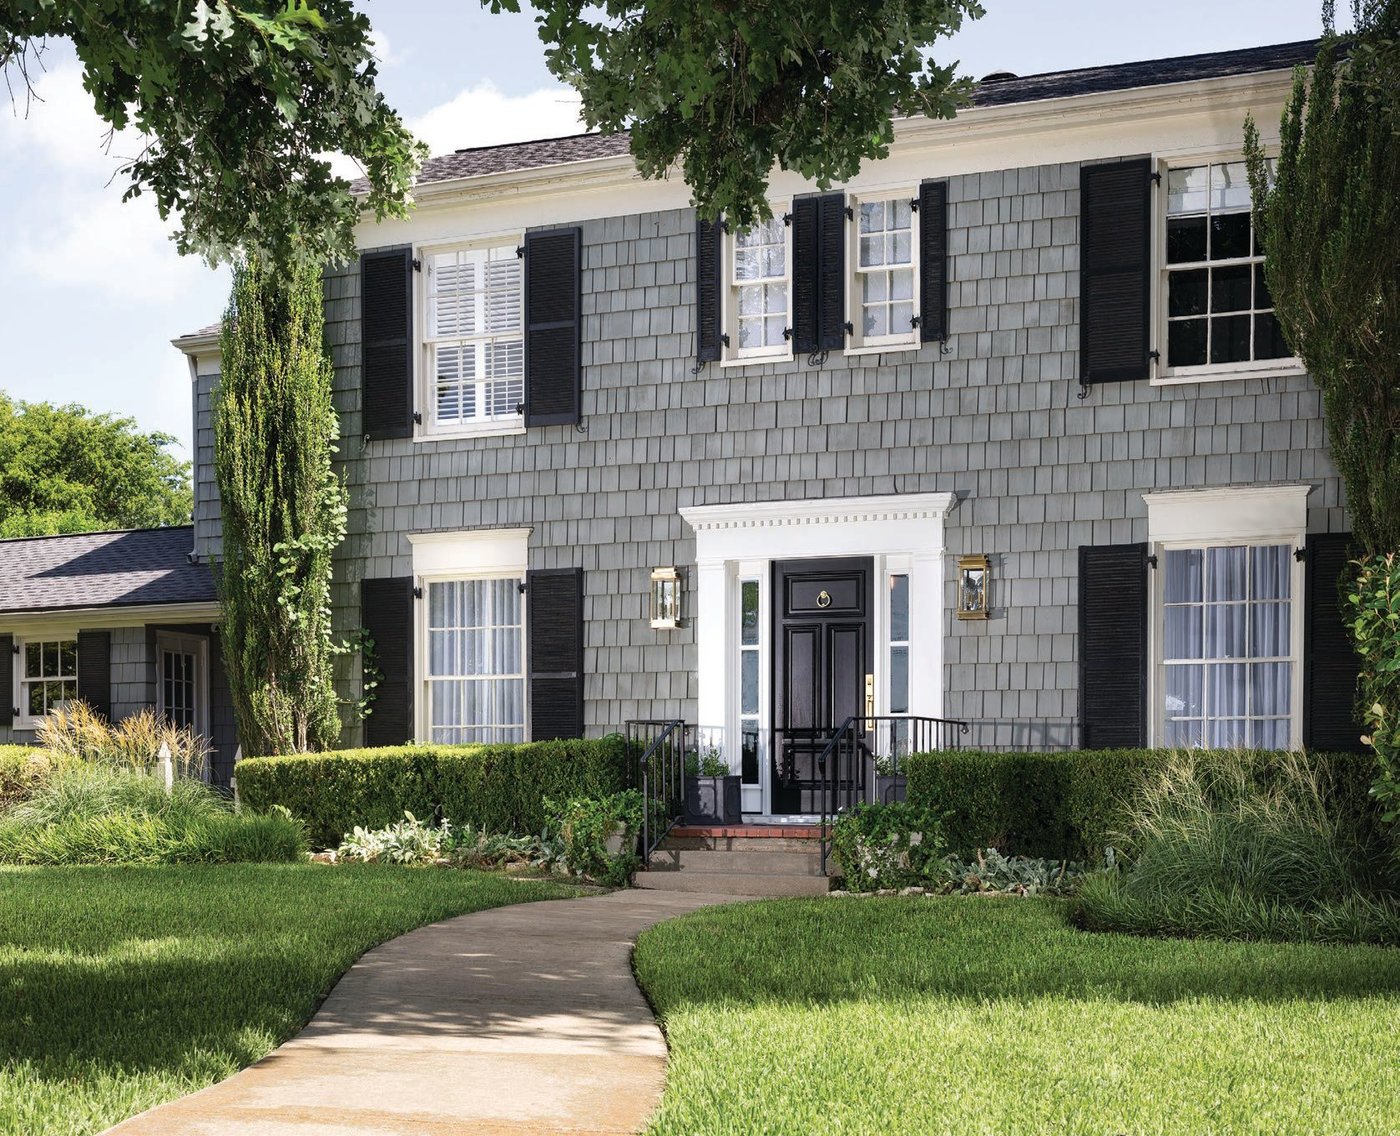 The charming Colonial home stands as one of the neighborhood’s original cottages. PHOTOGRAPHED BY JENIFER MCNEIL BAKER